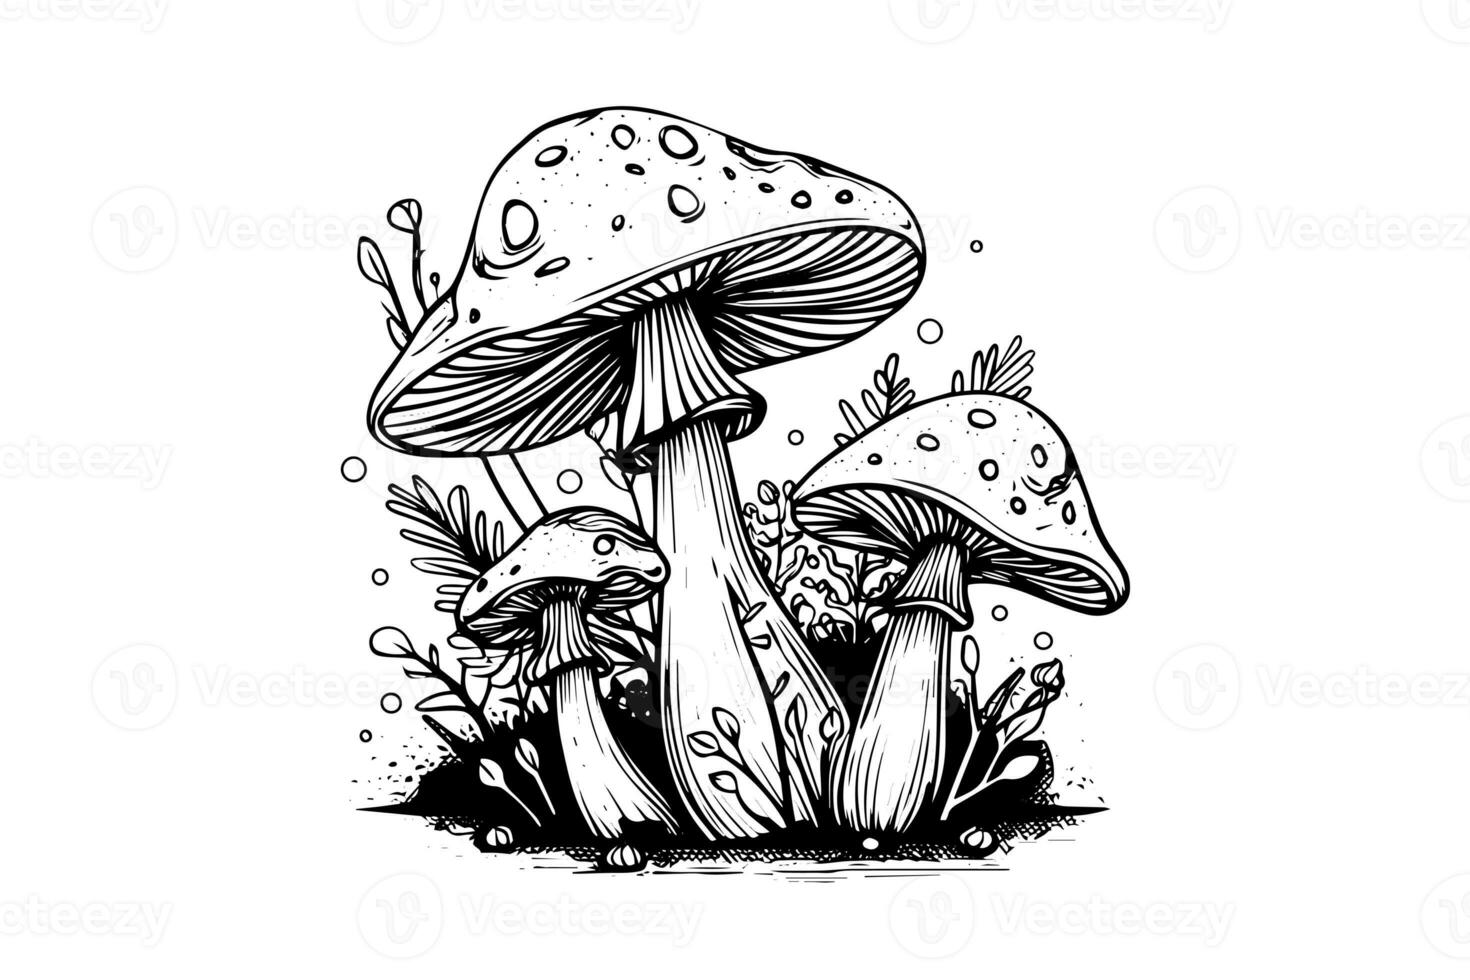 Fly agaric or amanita mushrooms group growing in grass engraving style. Vector illustration. photo